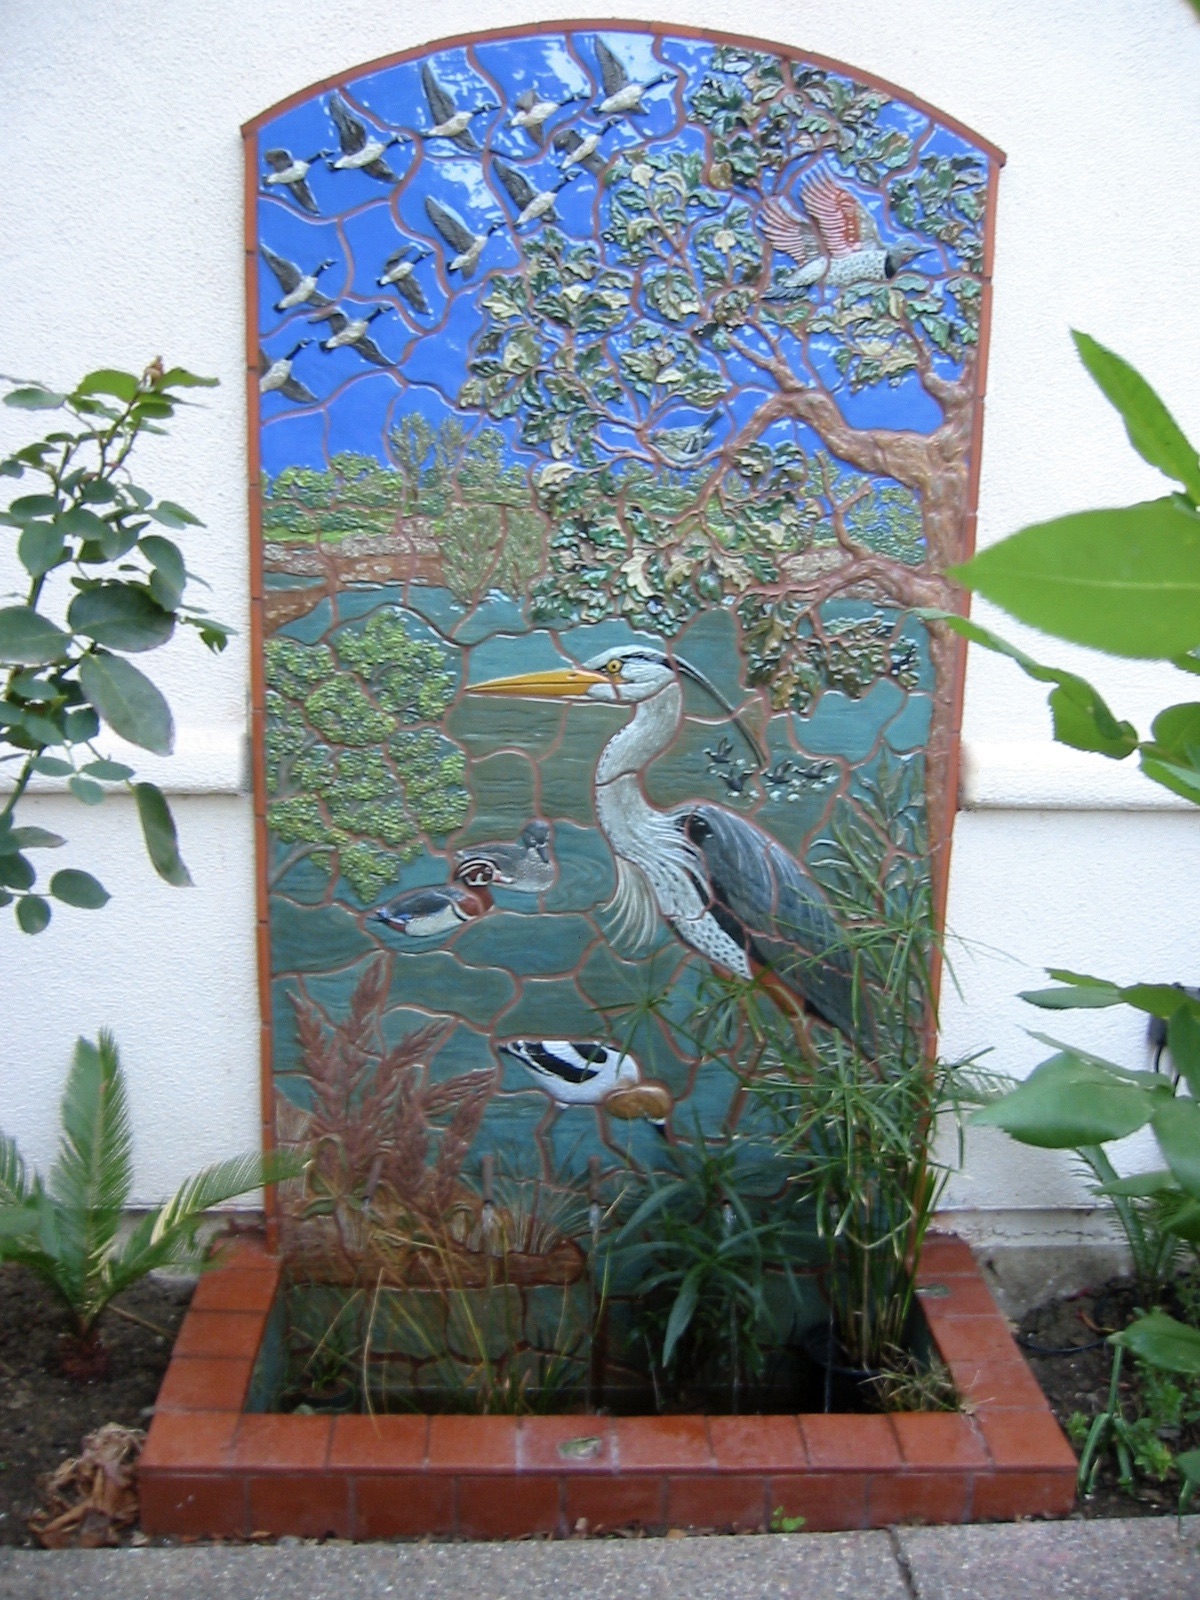 Carved Ceramic Mural for Fountain featuring Great Blue Heron and Wetland Wldlife